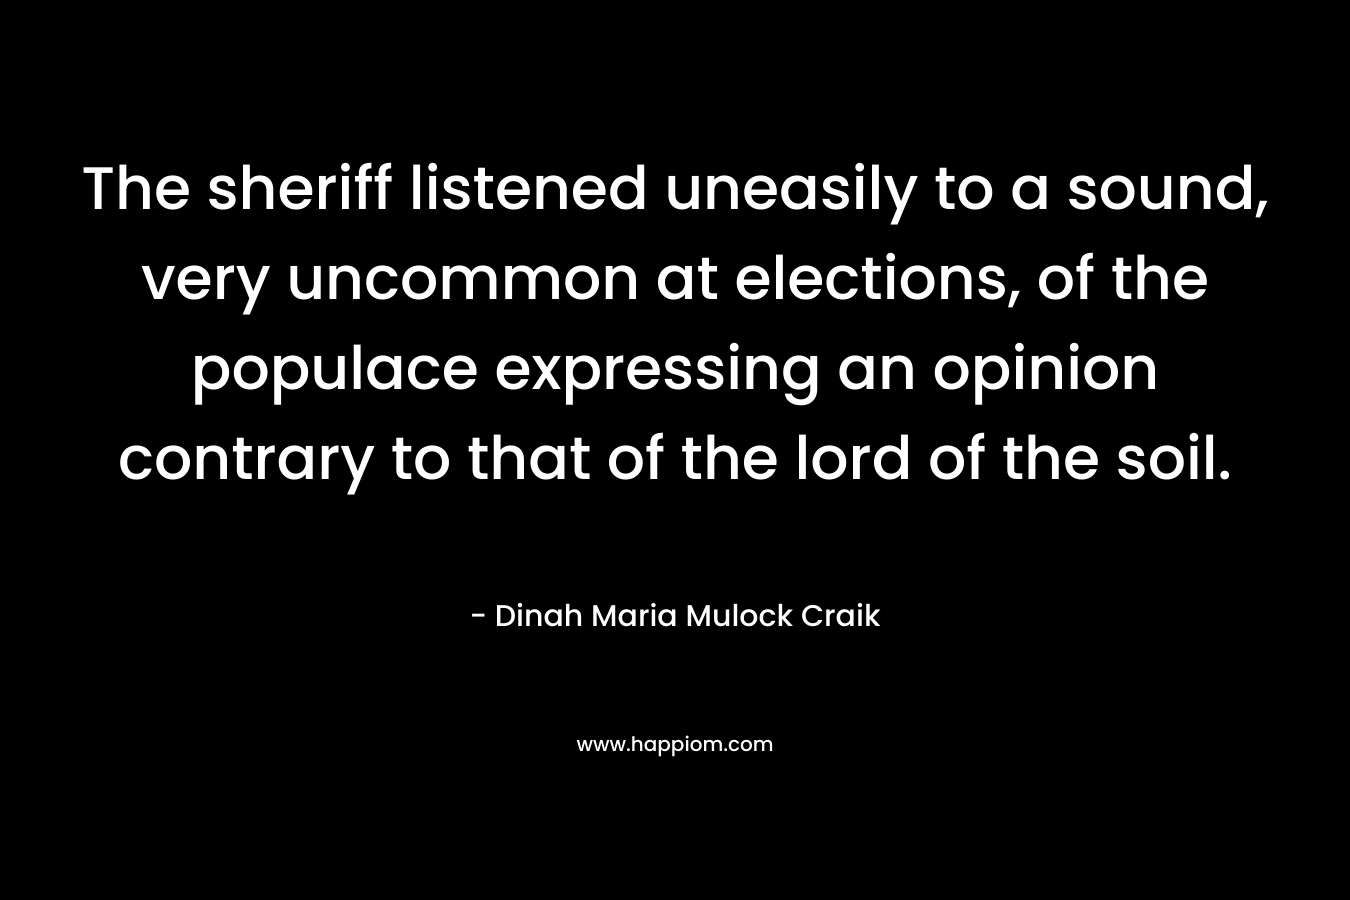 The sheriff listened uneasily to a sound, very uncommon at elections, of the populace expressing an opinion contrary to that of the lord of the soil. – Dinah Maria Mulock Craik